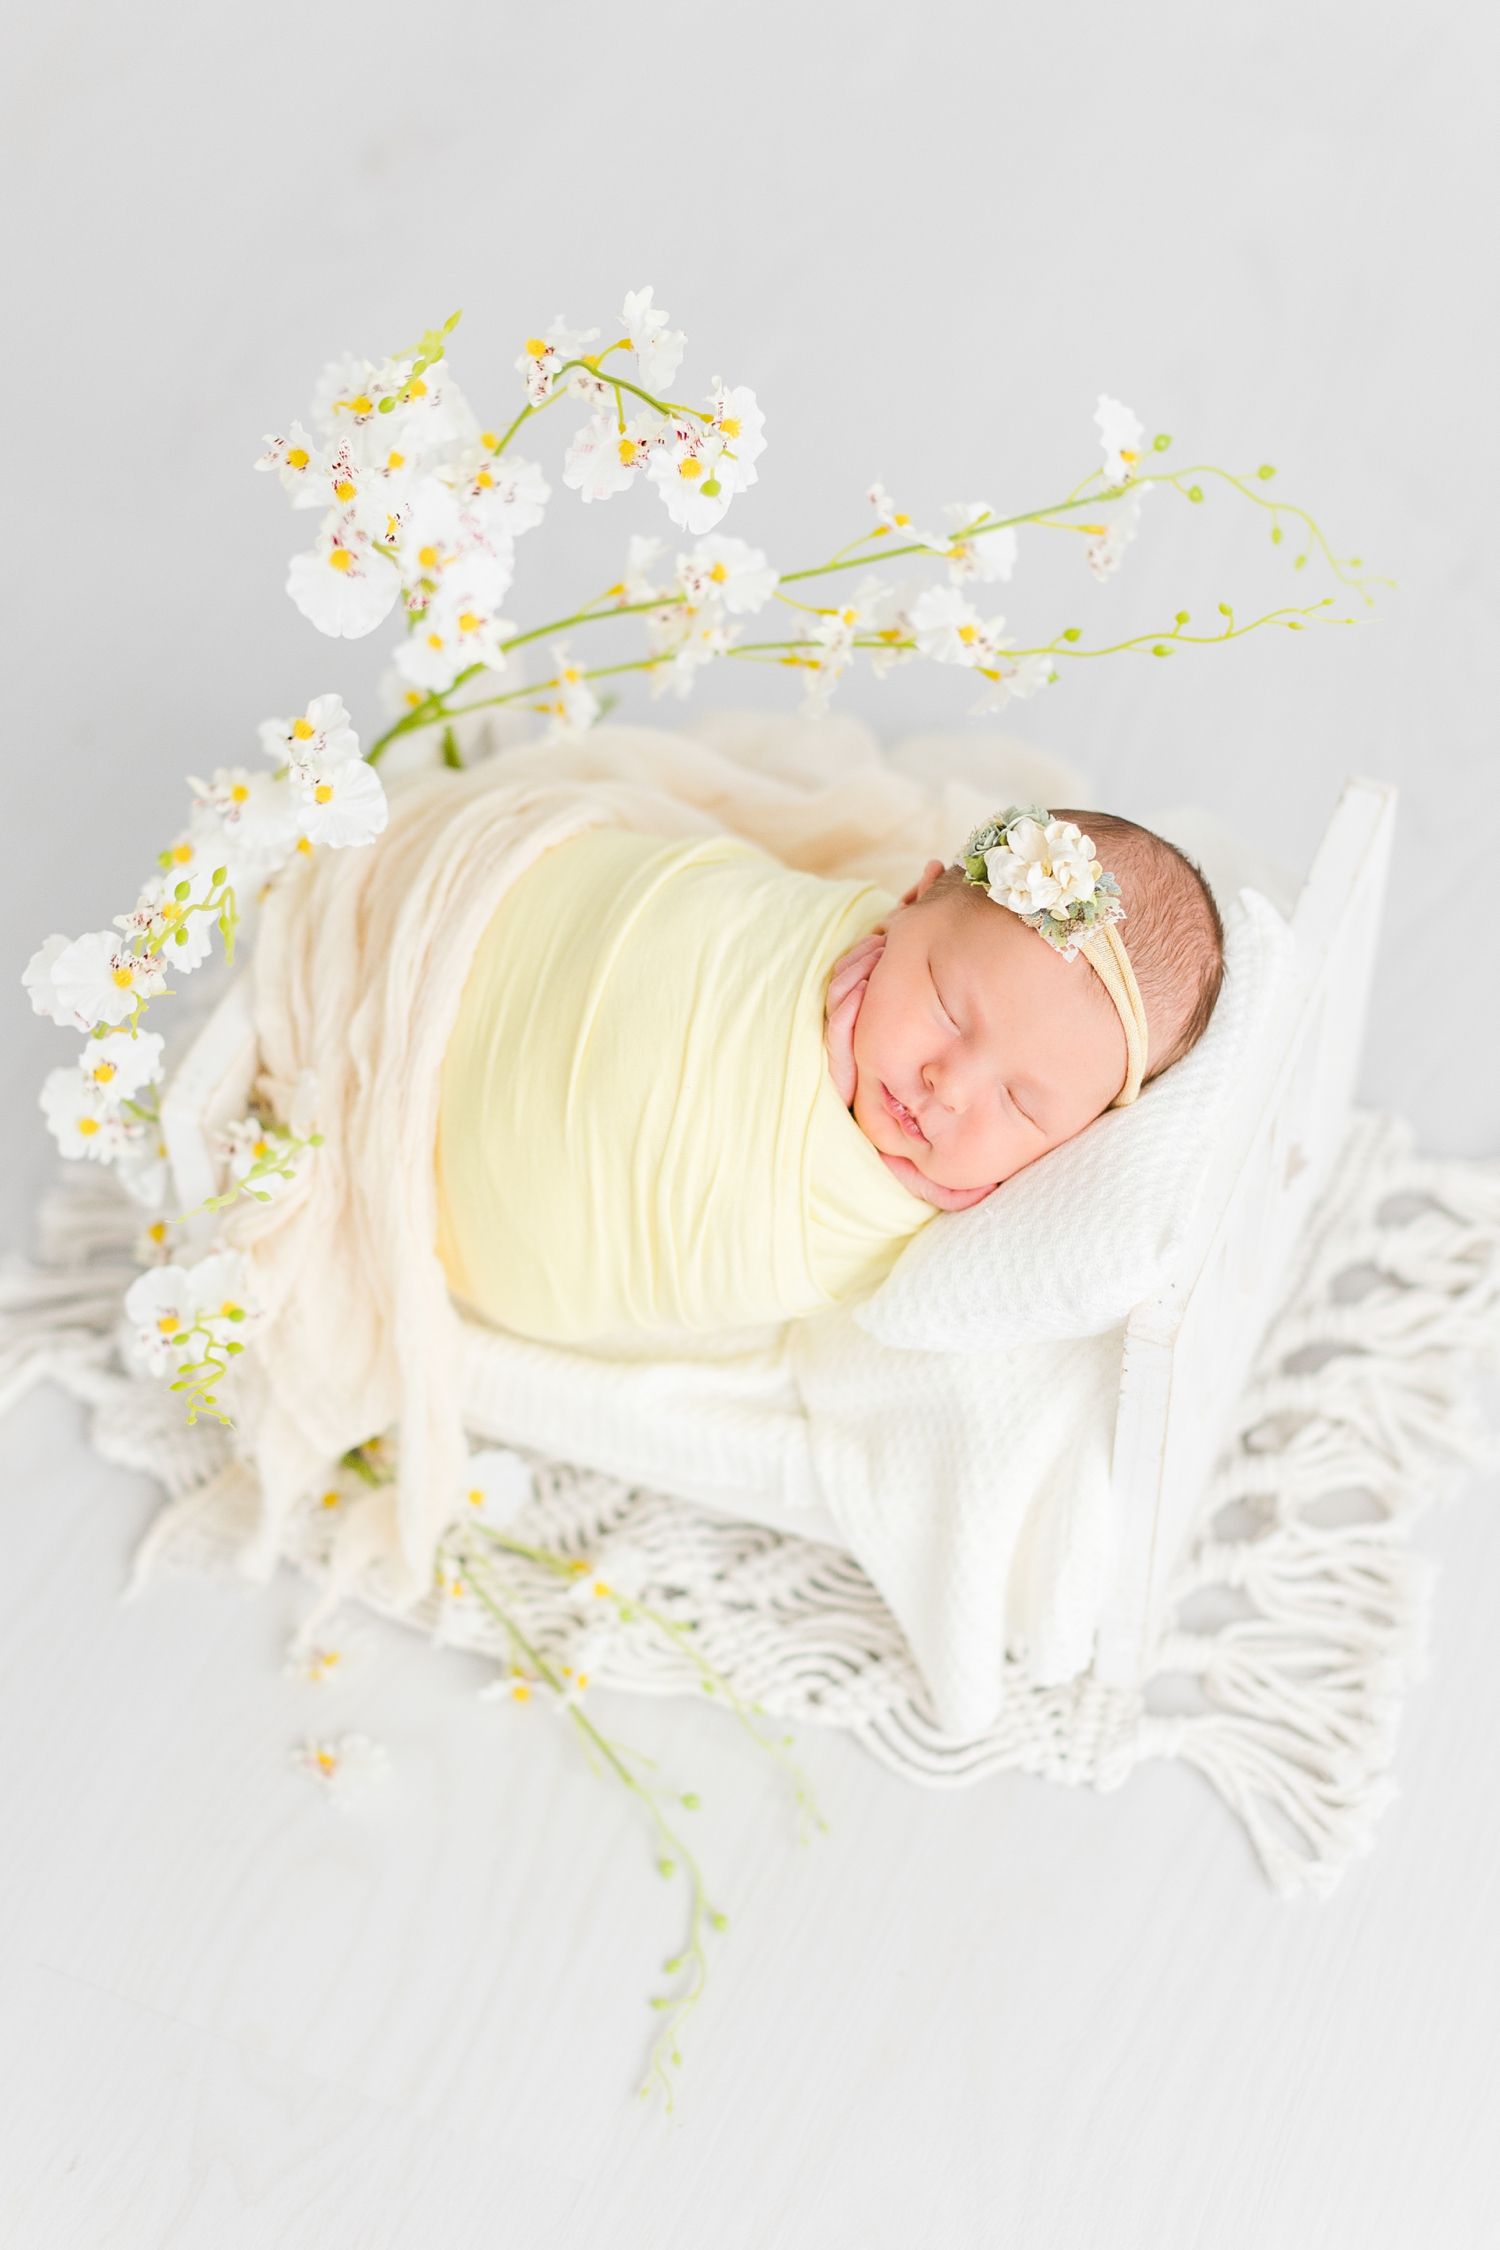 Baby Olivia wrapped in soft yellow laying on a white wooden bed surrounded by white orchid branches | CB Studio